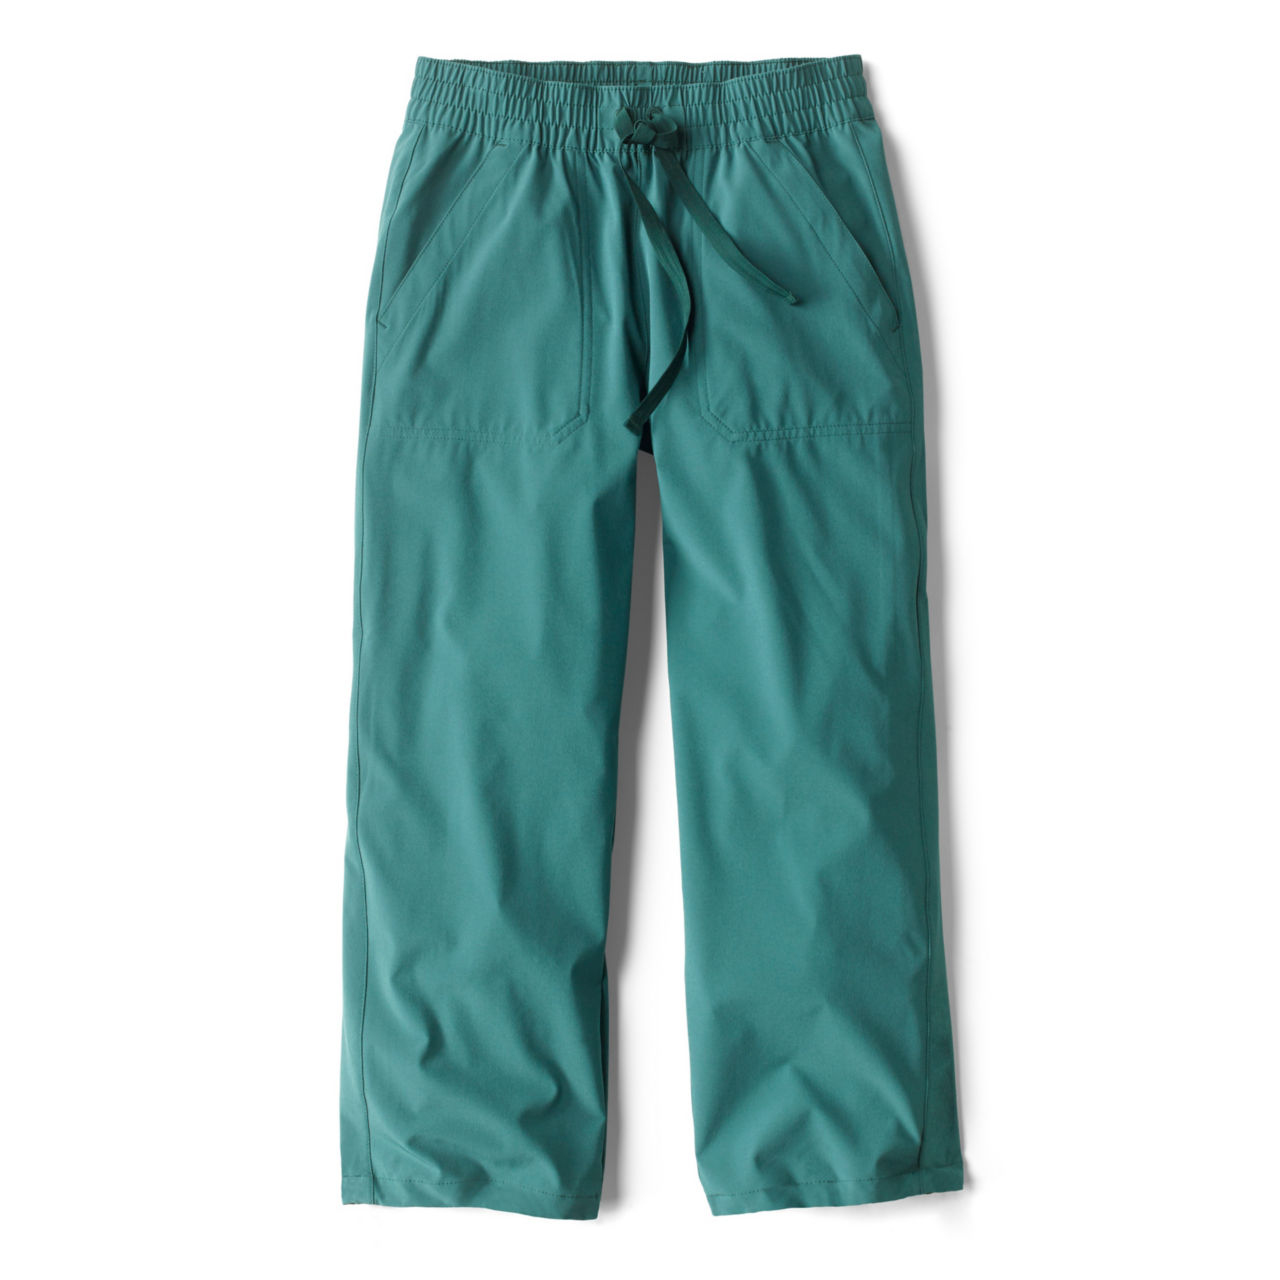 All-Around Relaxed Fit Capri Pants -  image number 4